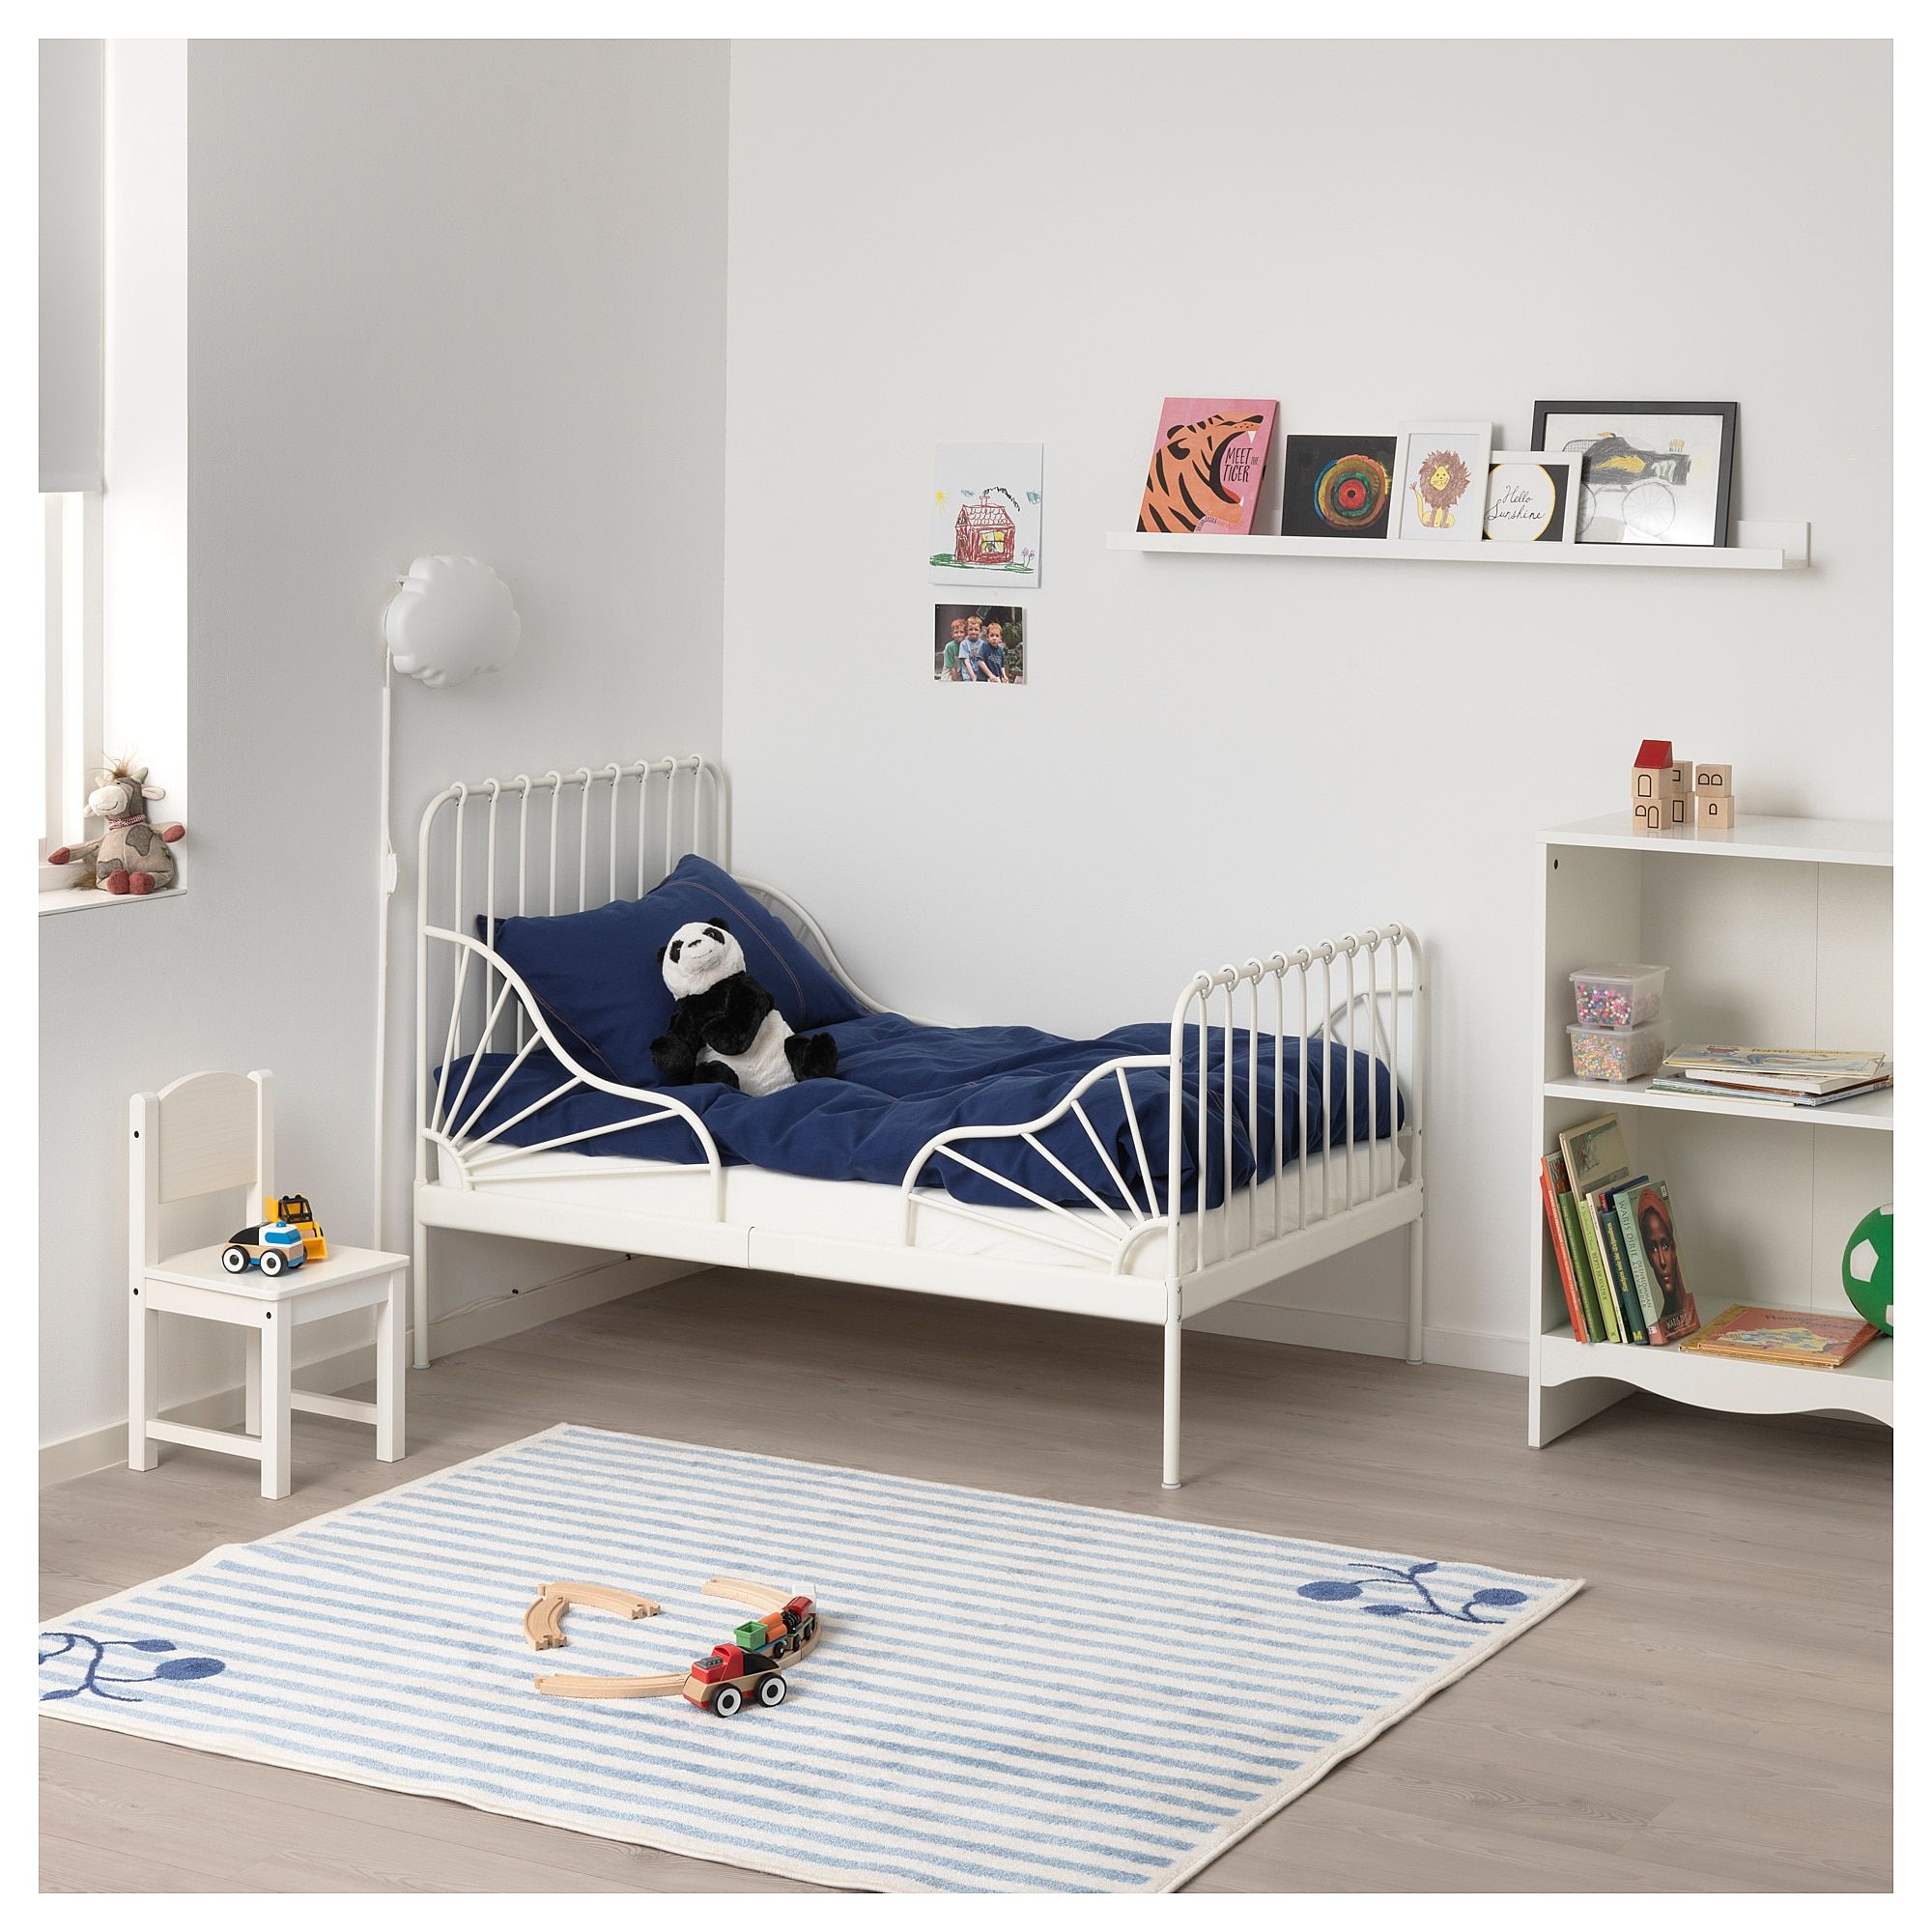 MINNEN Ext bed frame with slatted bed base - white 38 1 ...